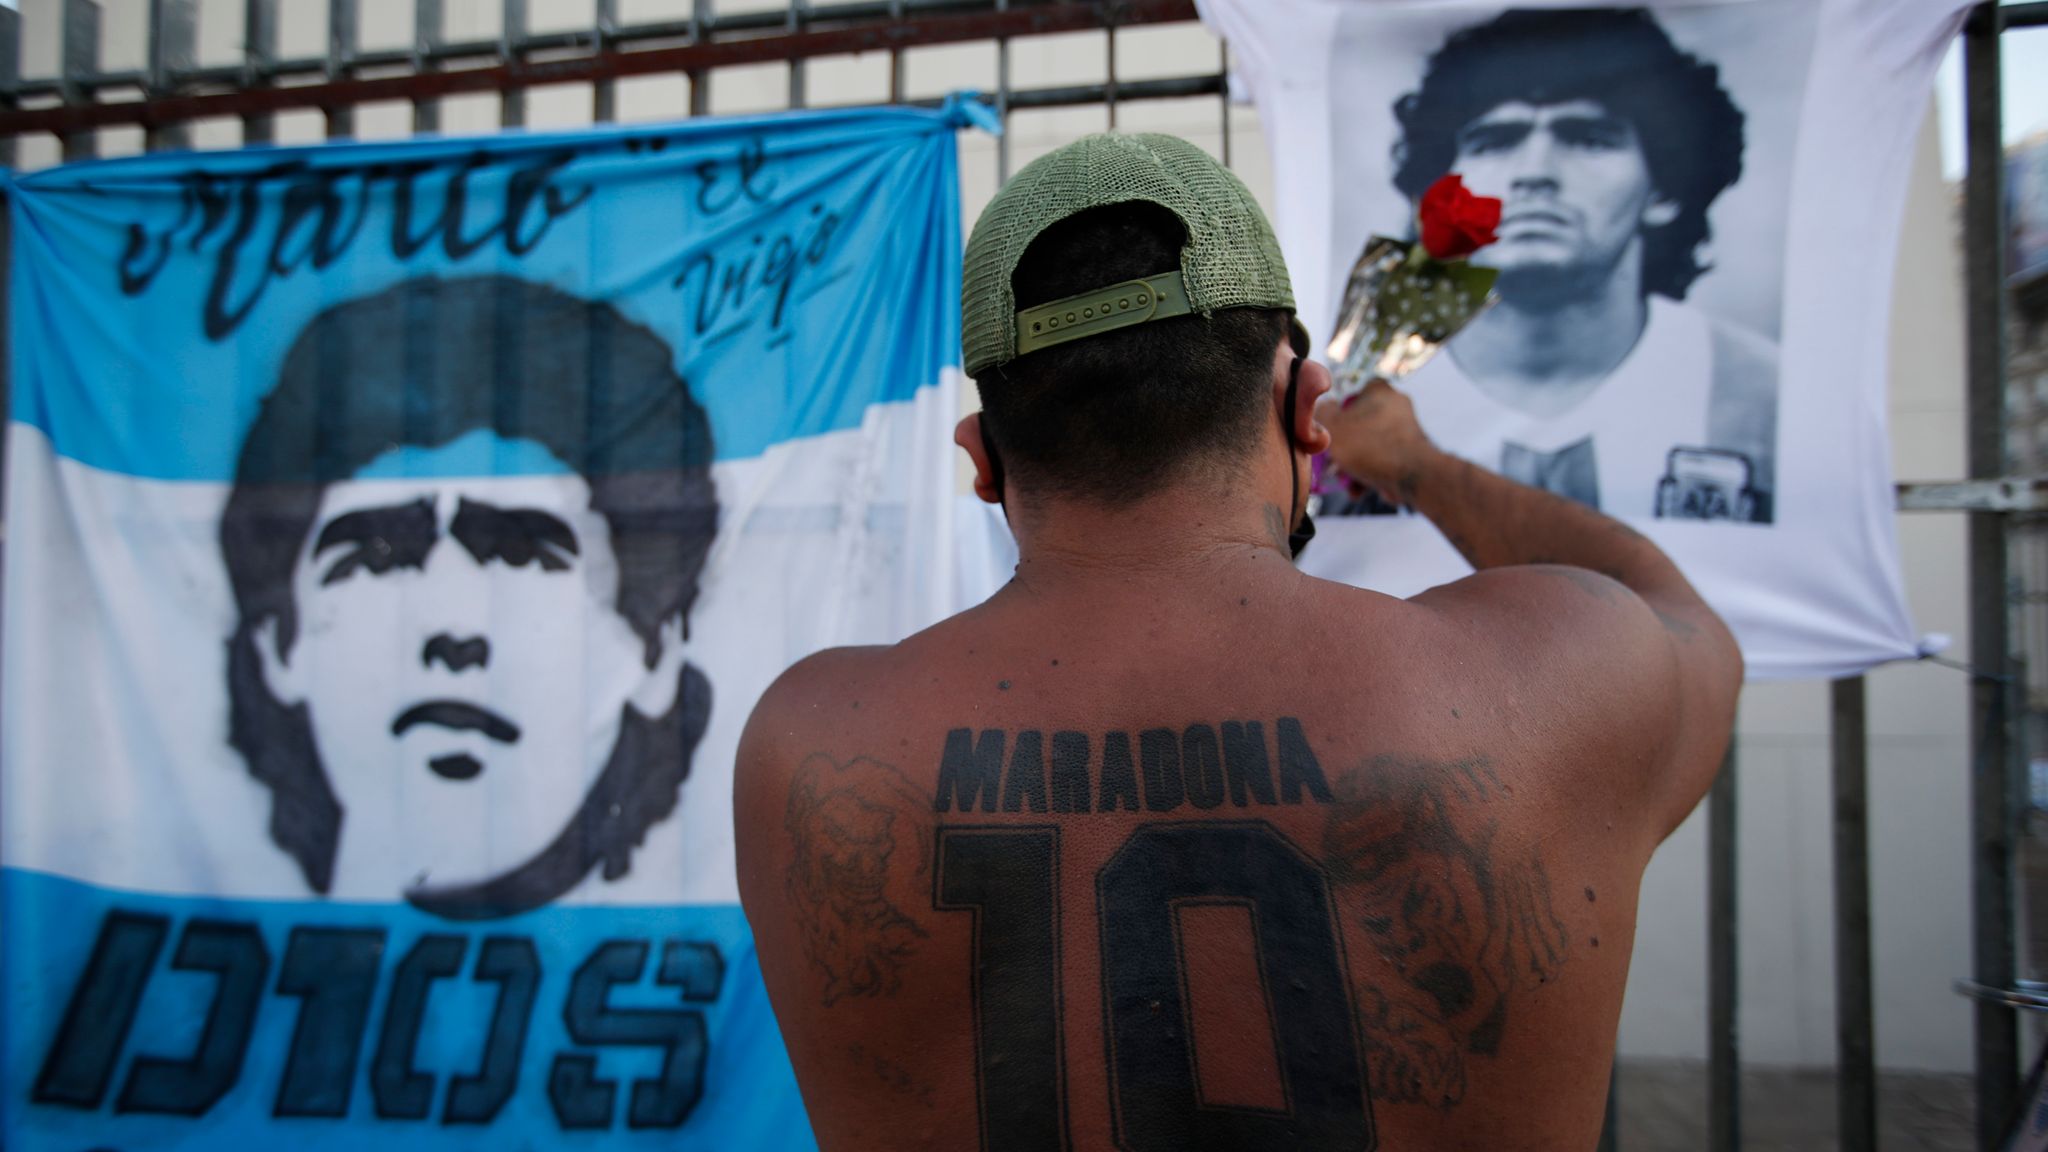 Diego Maradona care deficient and reckless, medical report says - BBC News